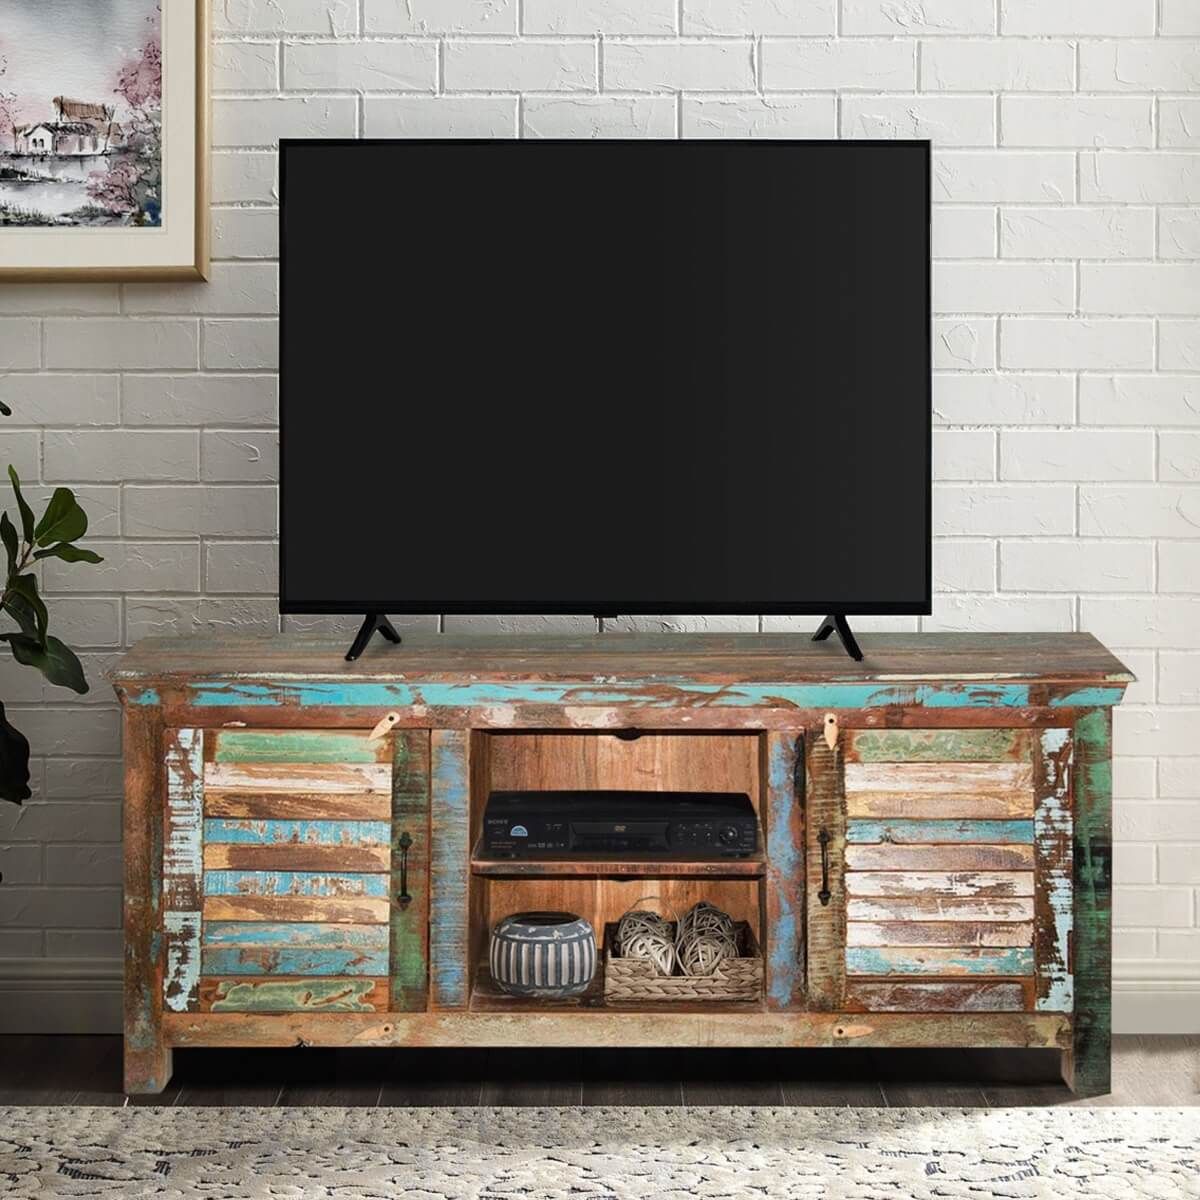 Fenwick Rustic Reclaimed Wood Shutter Door Tv Stand Media Intended For Wooden Tv Cabinets (View 14 of 15)